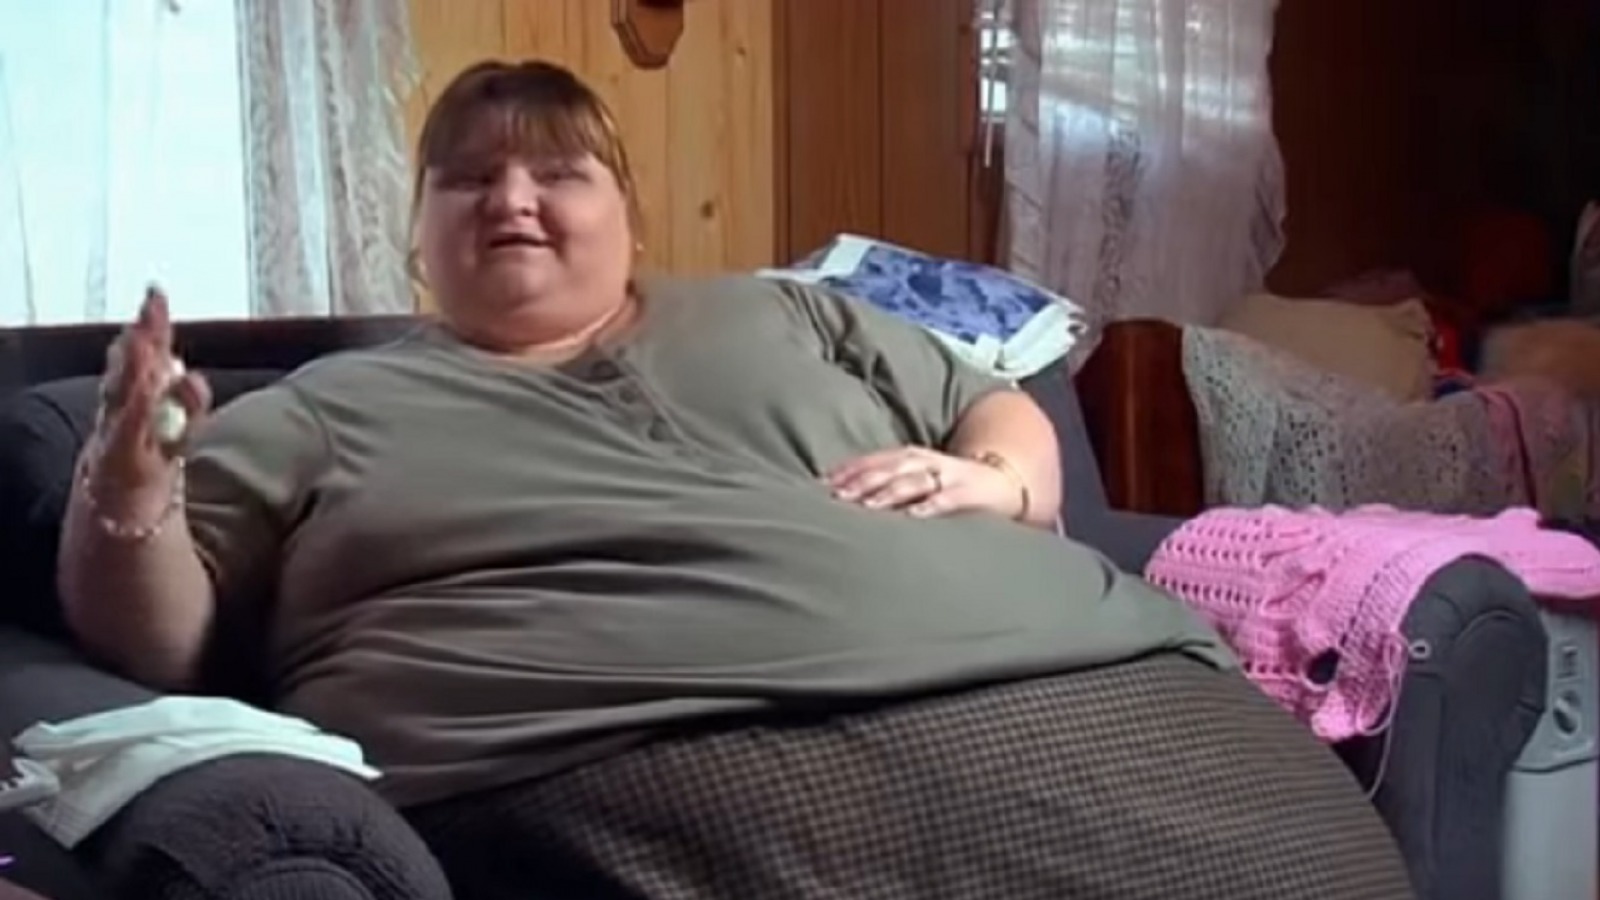 The Truth About Dr. Now's Famous Diet Plan For My 600-Lb Life